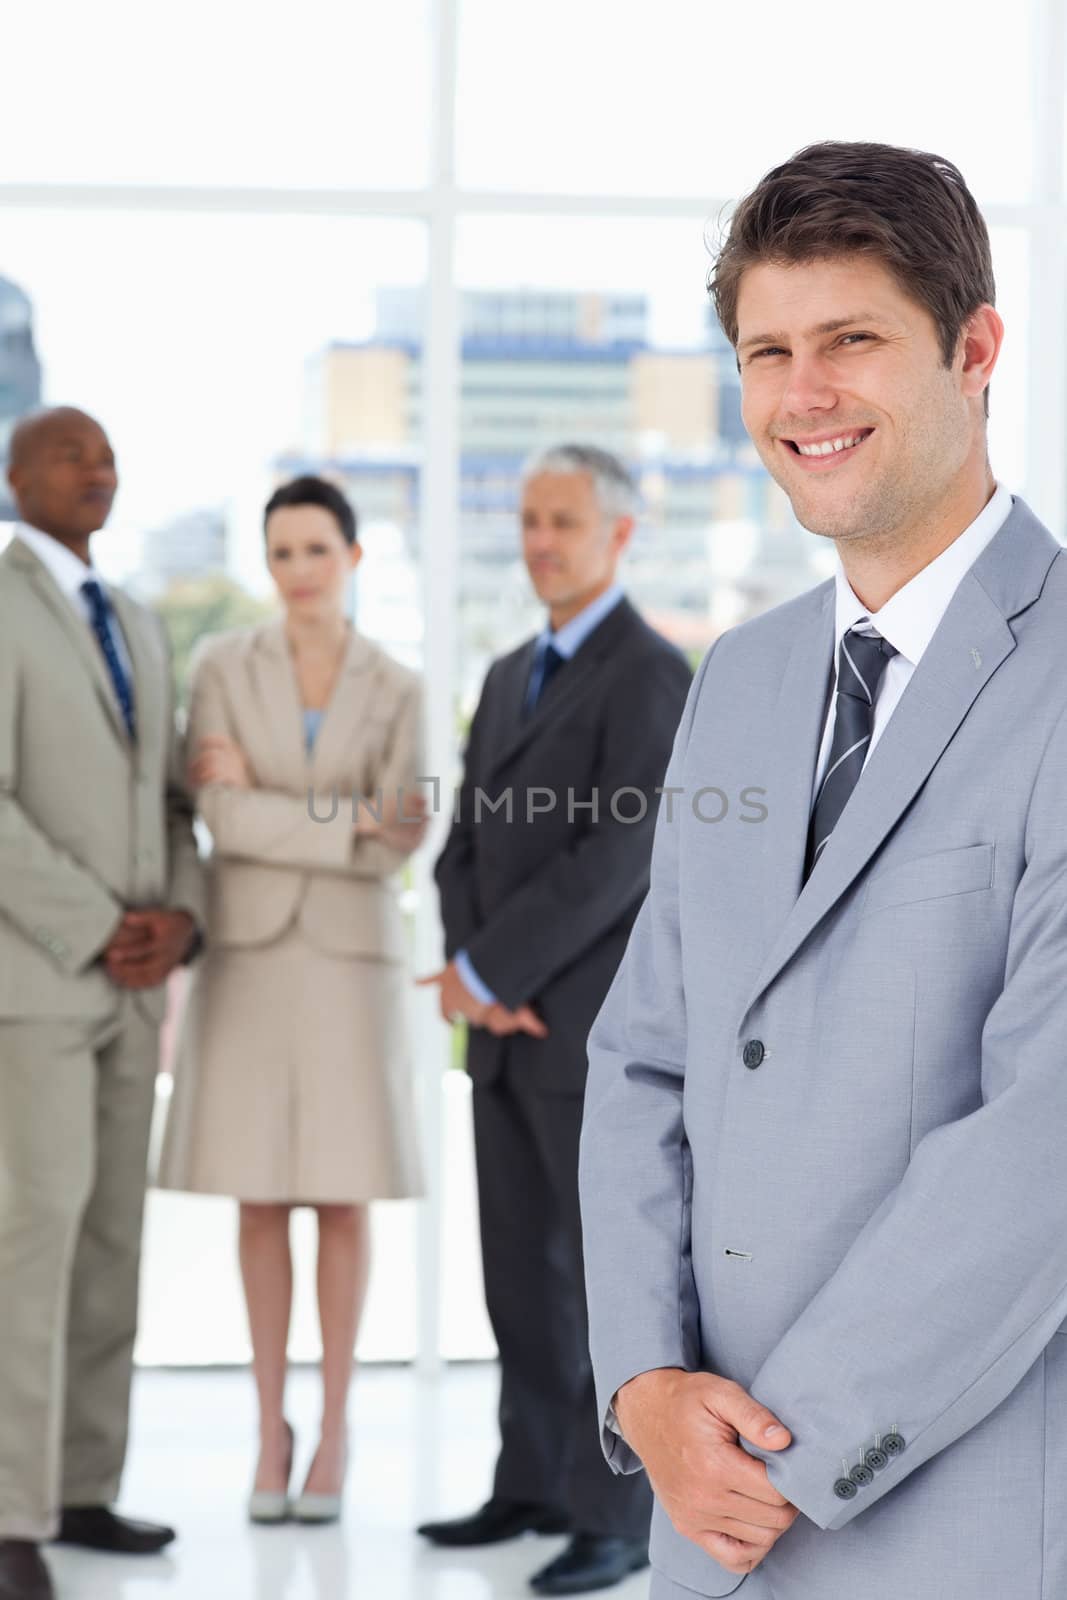 Business team looking at the smiling executive in front of them